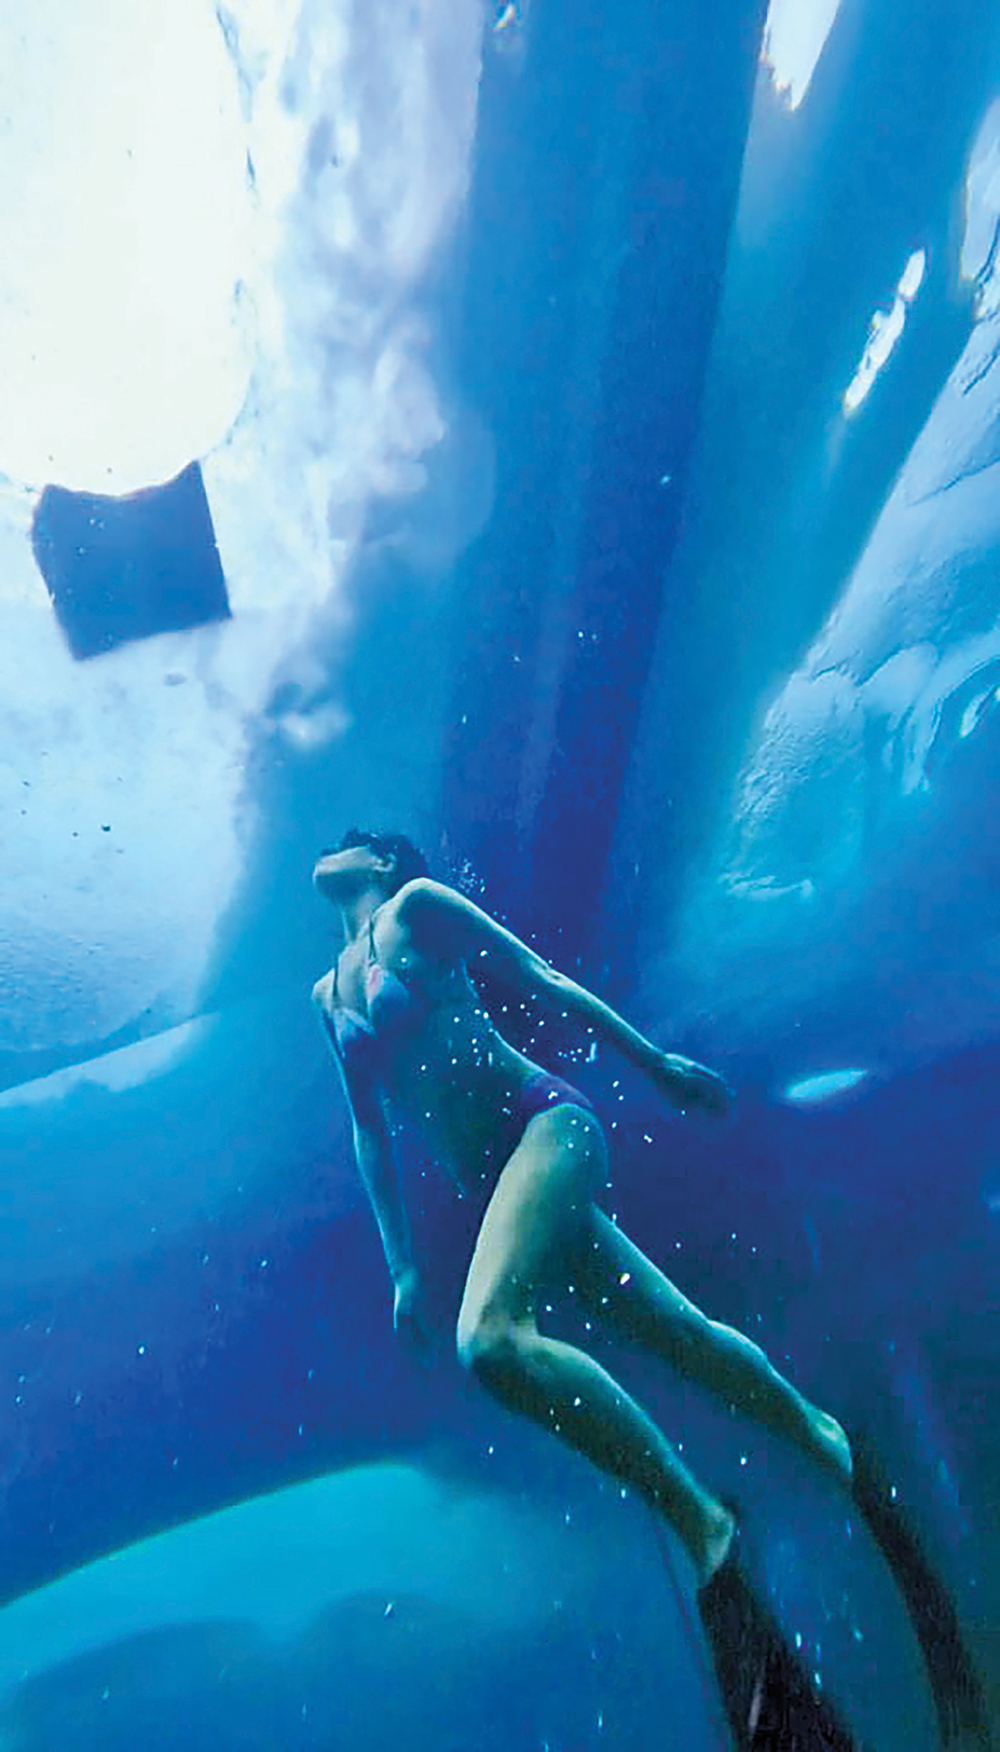 Below the ice without a wetsuit—Lilly Ryzebol in Lion’s Head Harbour, February 2022.